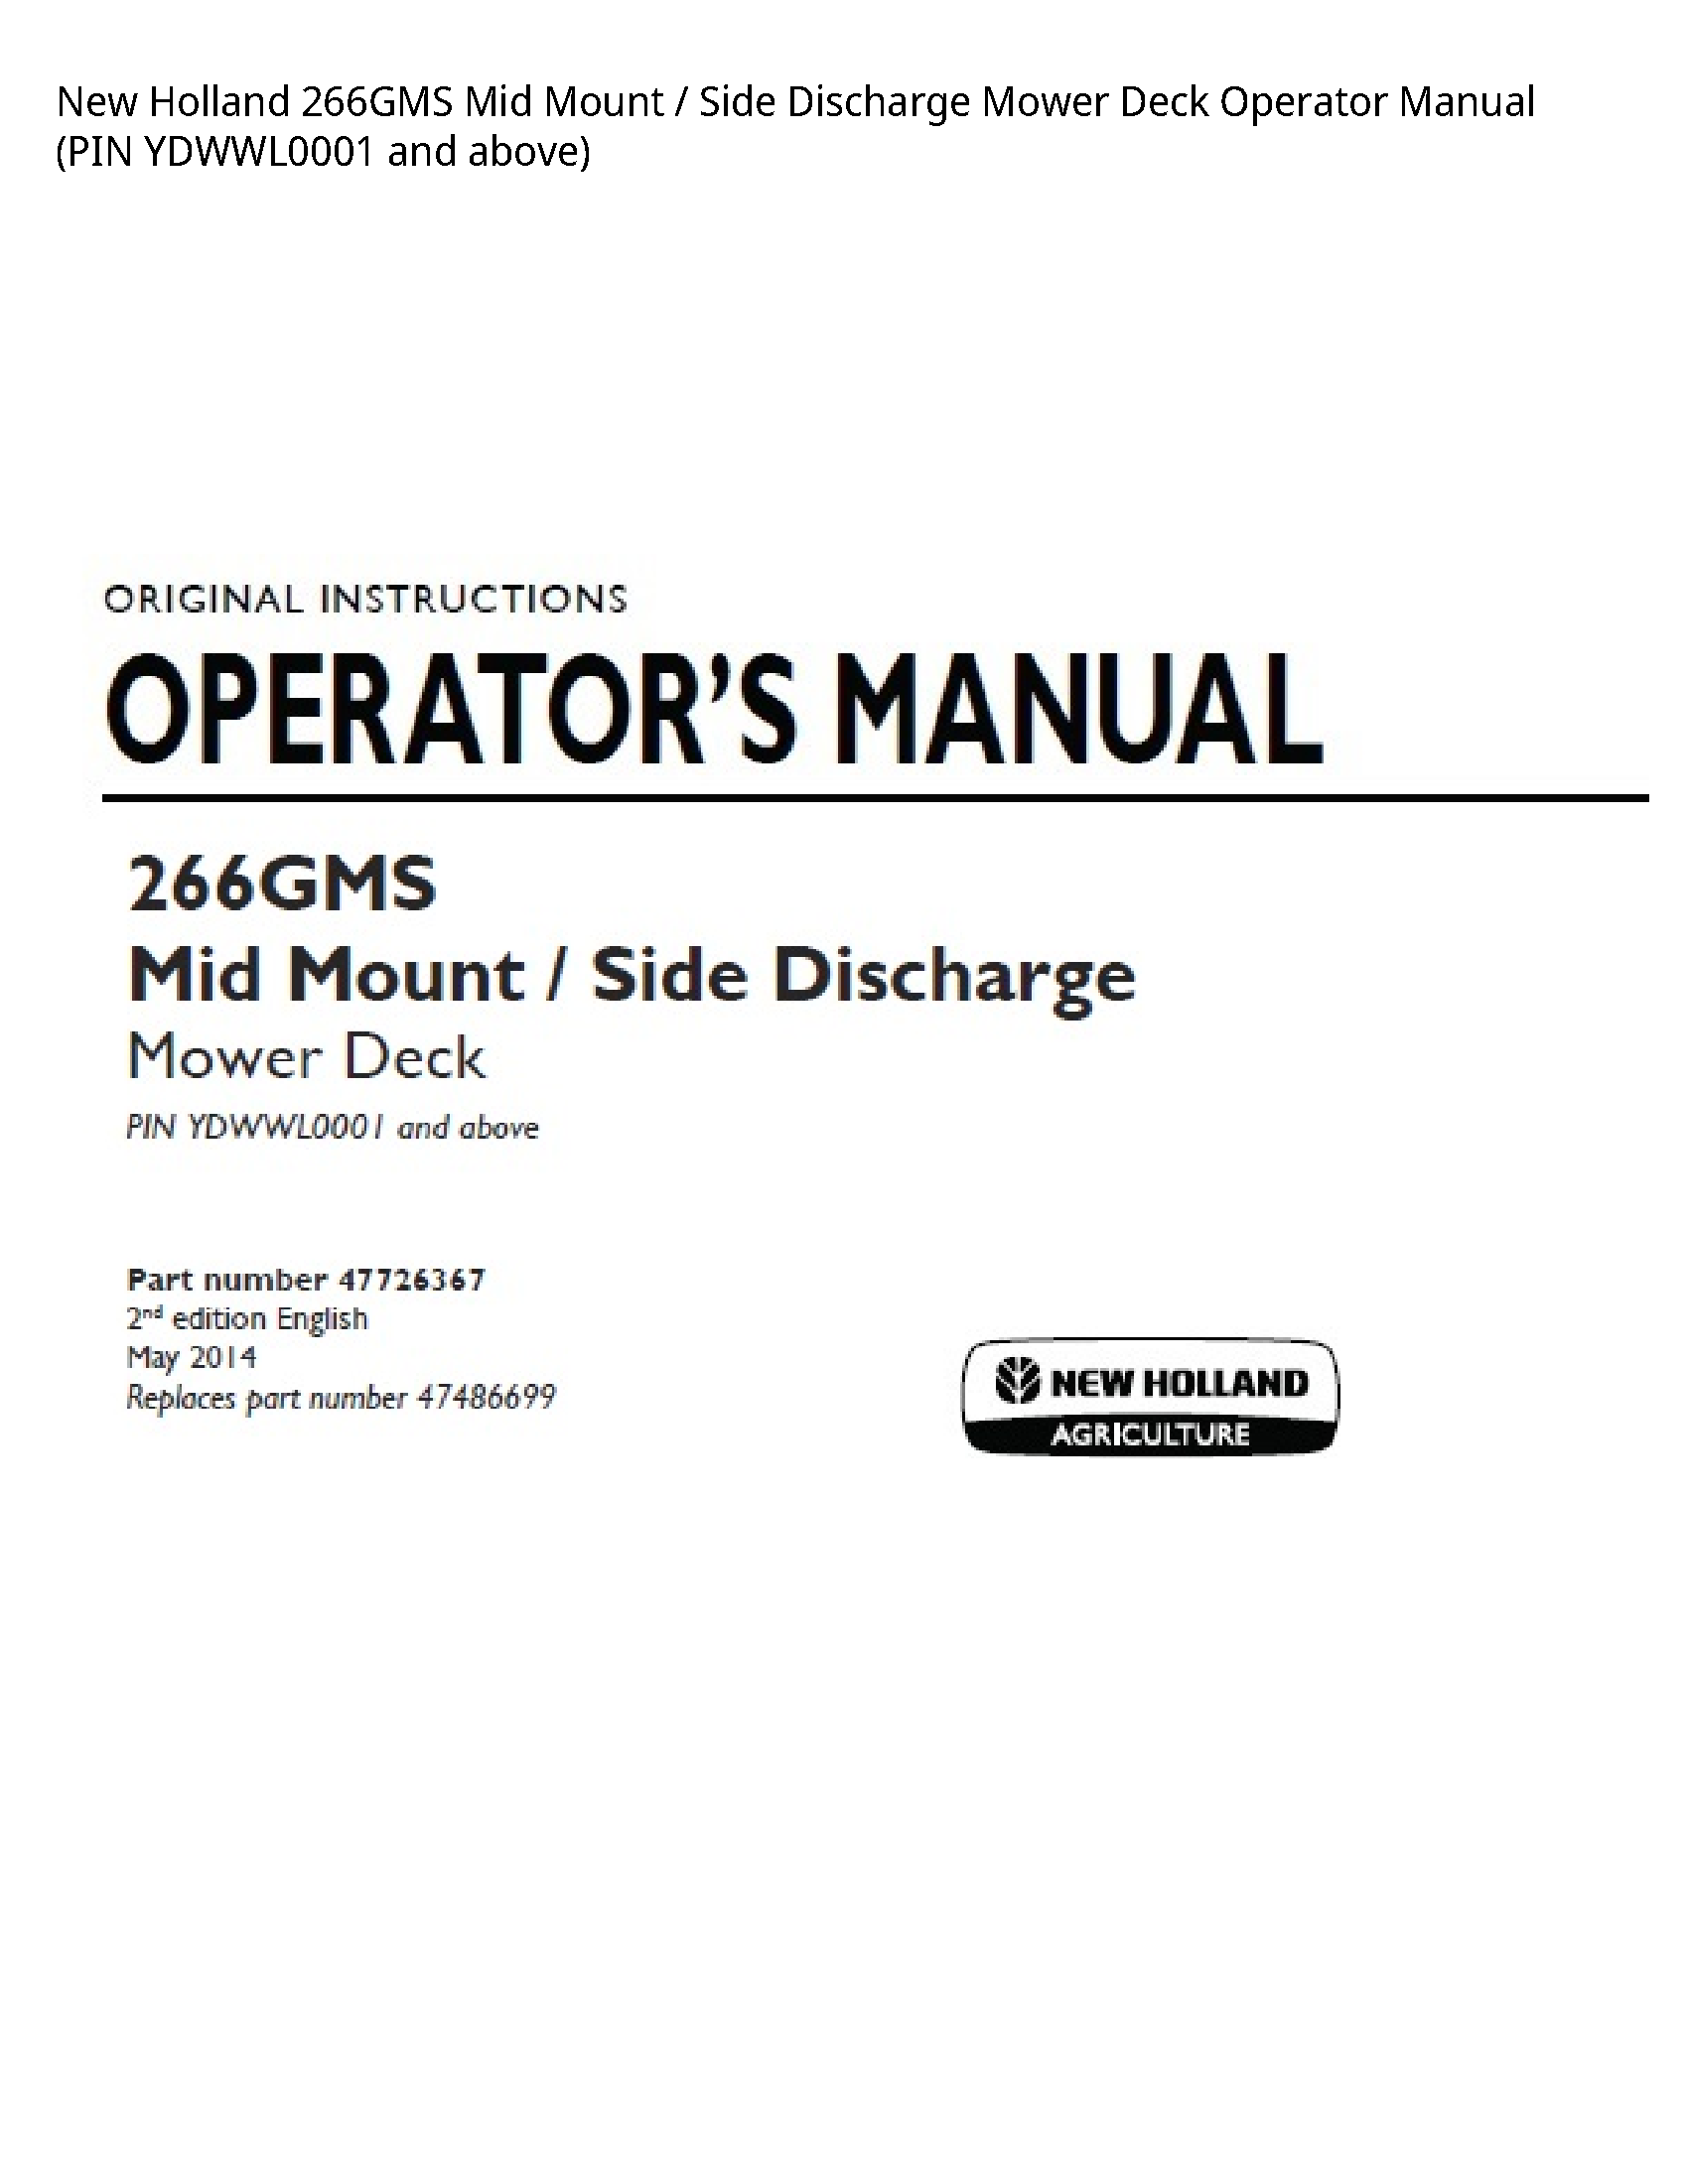 New Holland 266GMS Mid Mount Side Discharge Mower Deck Operator manual